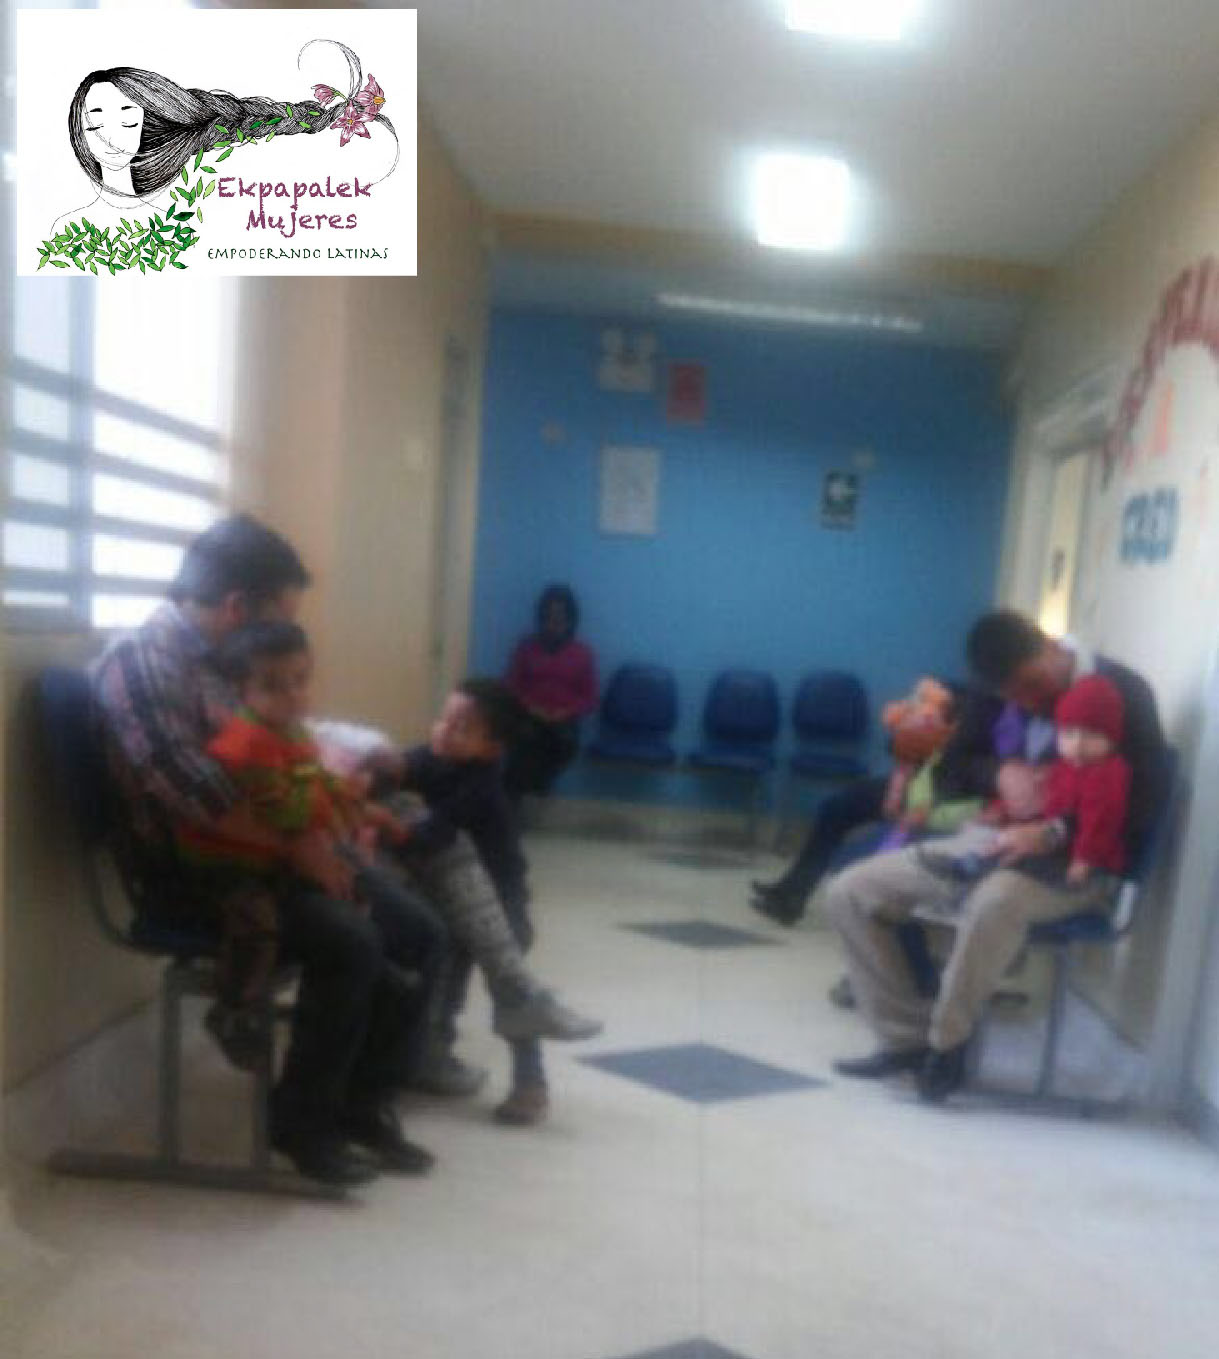 “ We also received a picture from the hospital in the city of Huacho (Peru), who was sent by one of our followers. She told us that she was happily suprised to see more fathers bringing their children on their own to the medical doctor’s appointments! Definitely a switched from what was observed some years ago”